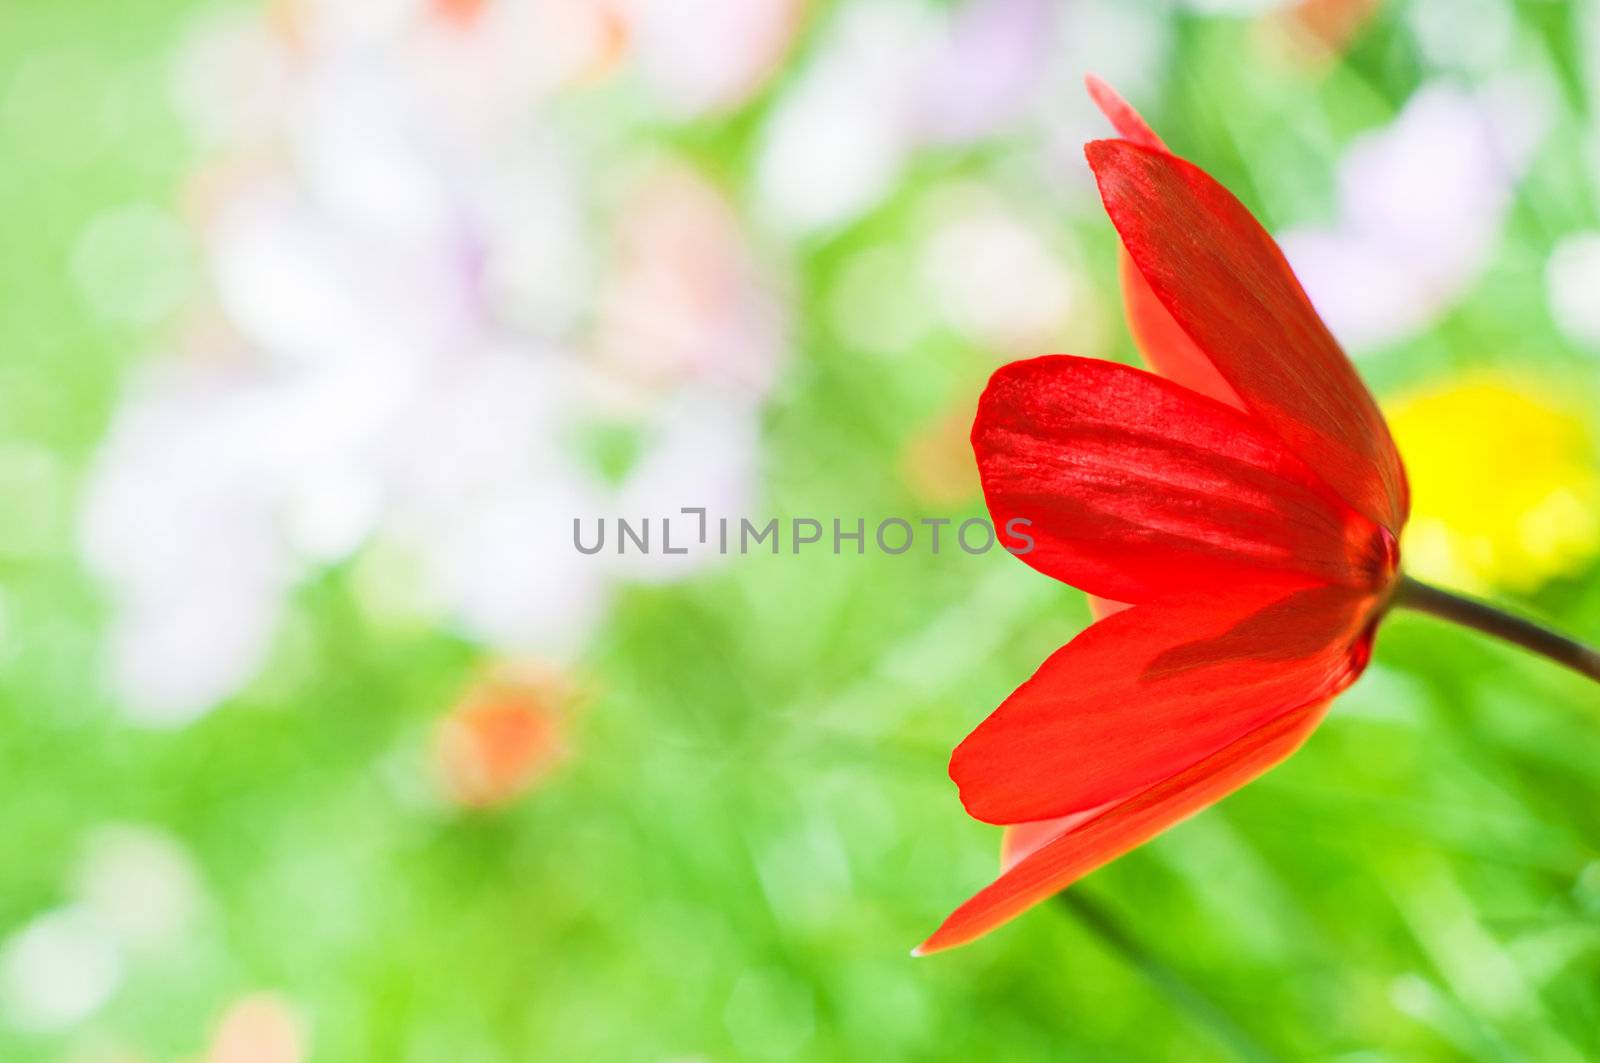 Side view close up of a bright red tulip reaching in from right frame with focus softening into the bright green grass and spring flowers behind it.